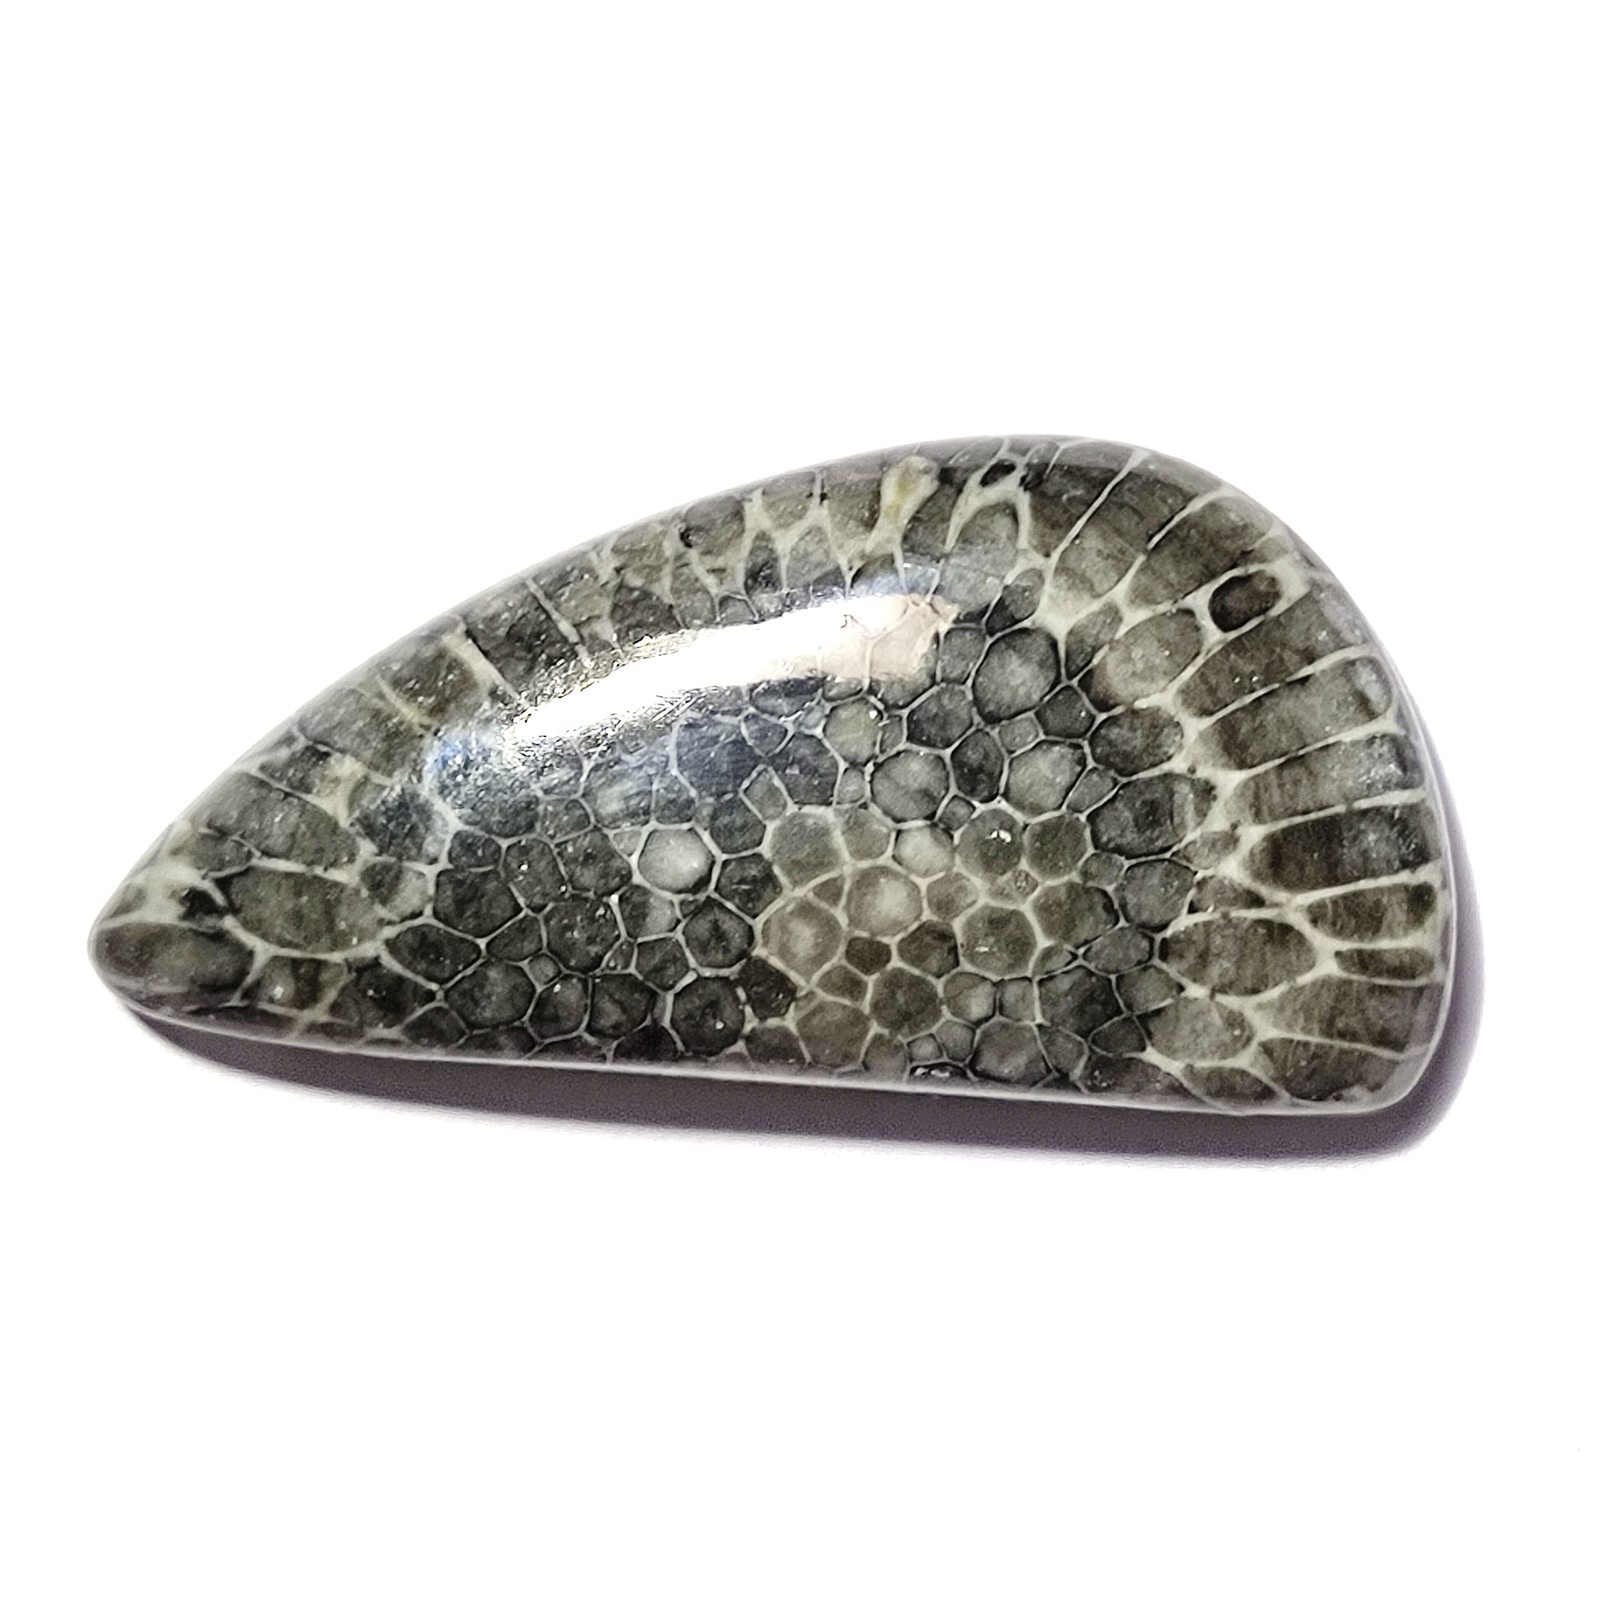 Primary image for 29.51 Carats TCW 100% Natural Beautiful Black Fossil Coral Fancy Cabochon Gem by